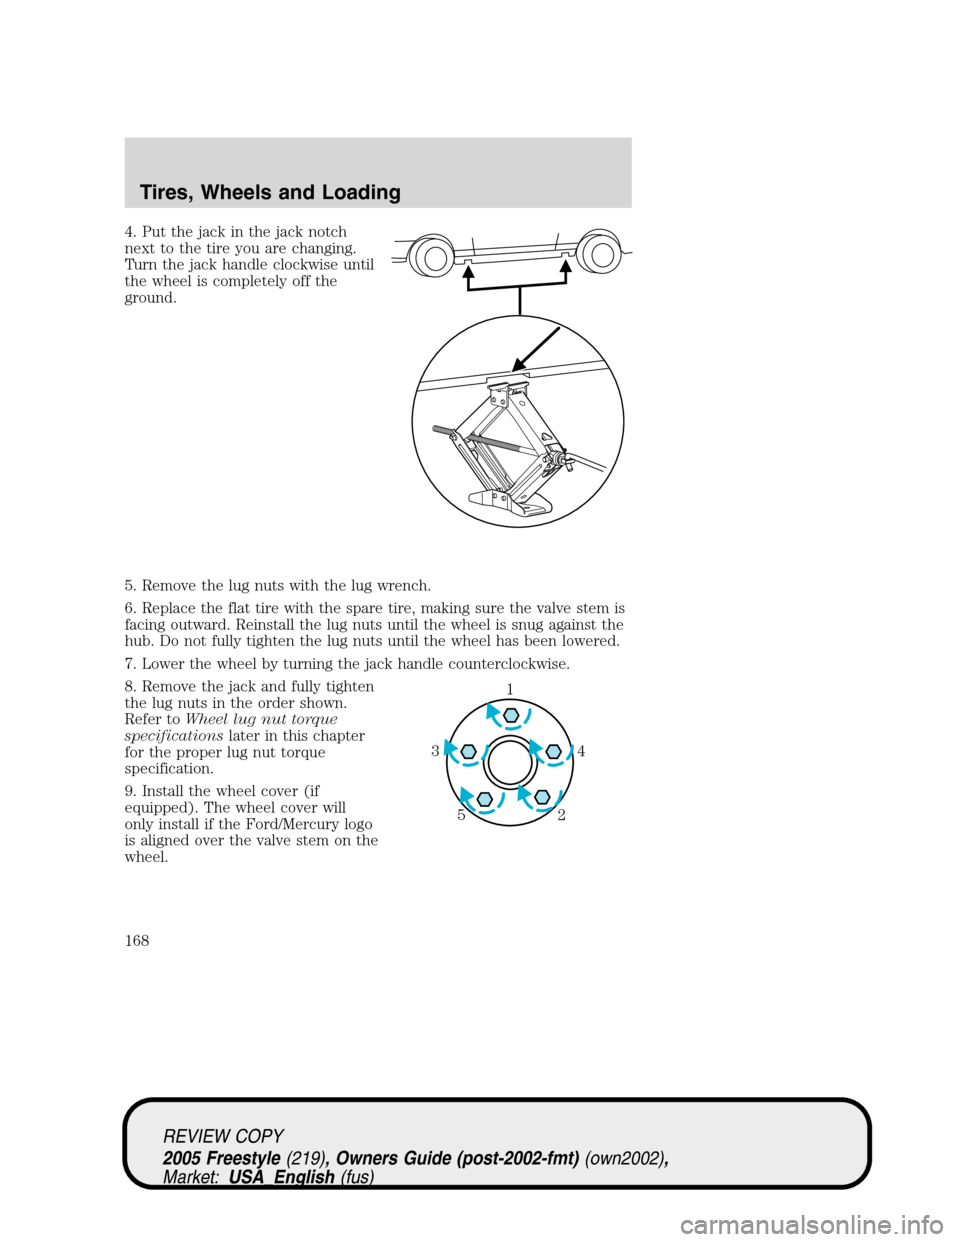 FORD FREESTYLE 2005 1.G Owners Manual 4. Put the jack in the jack notch
next to the tire you are changing.
Turn the jack handle clockwise until
the wheel is completely off the
ground.
5. Remove the lug nuts with the lug wrench.
6. Replace